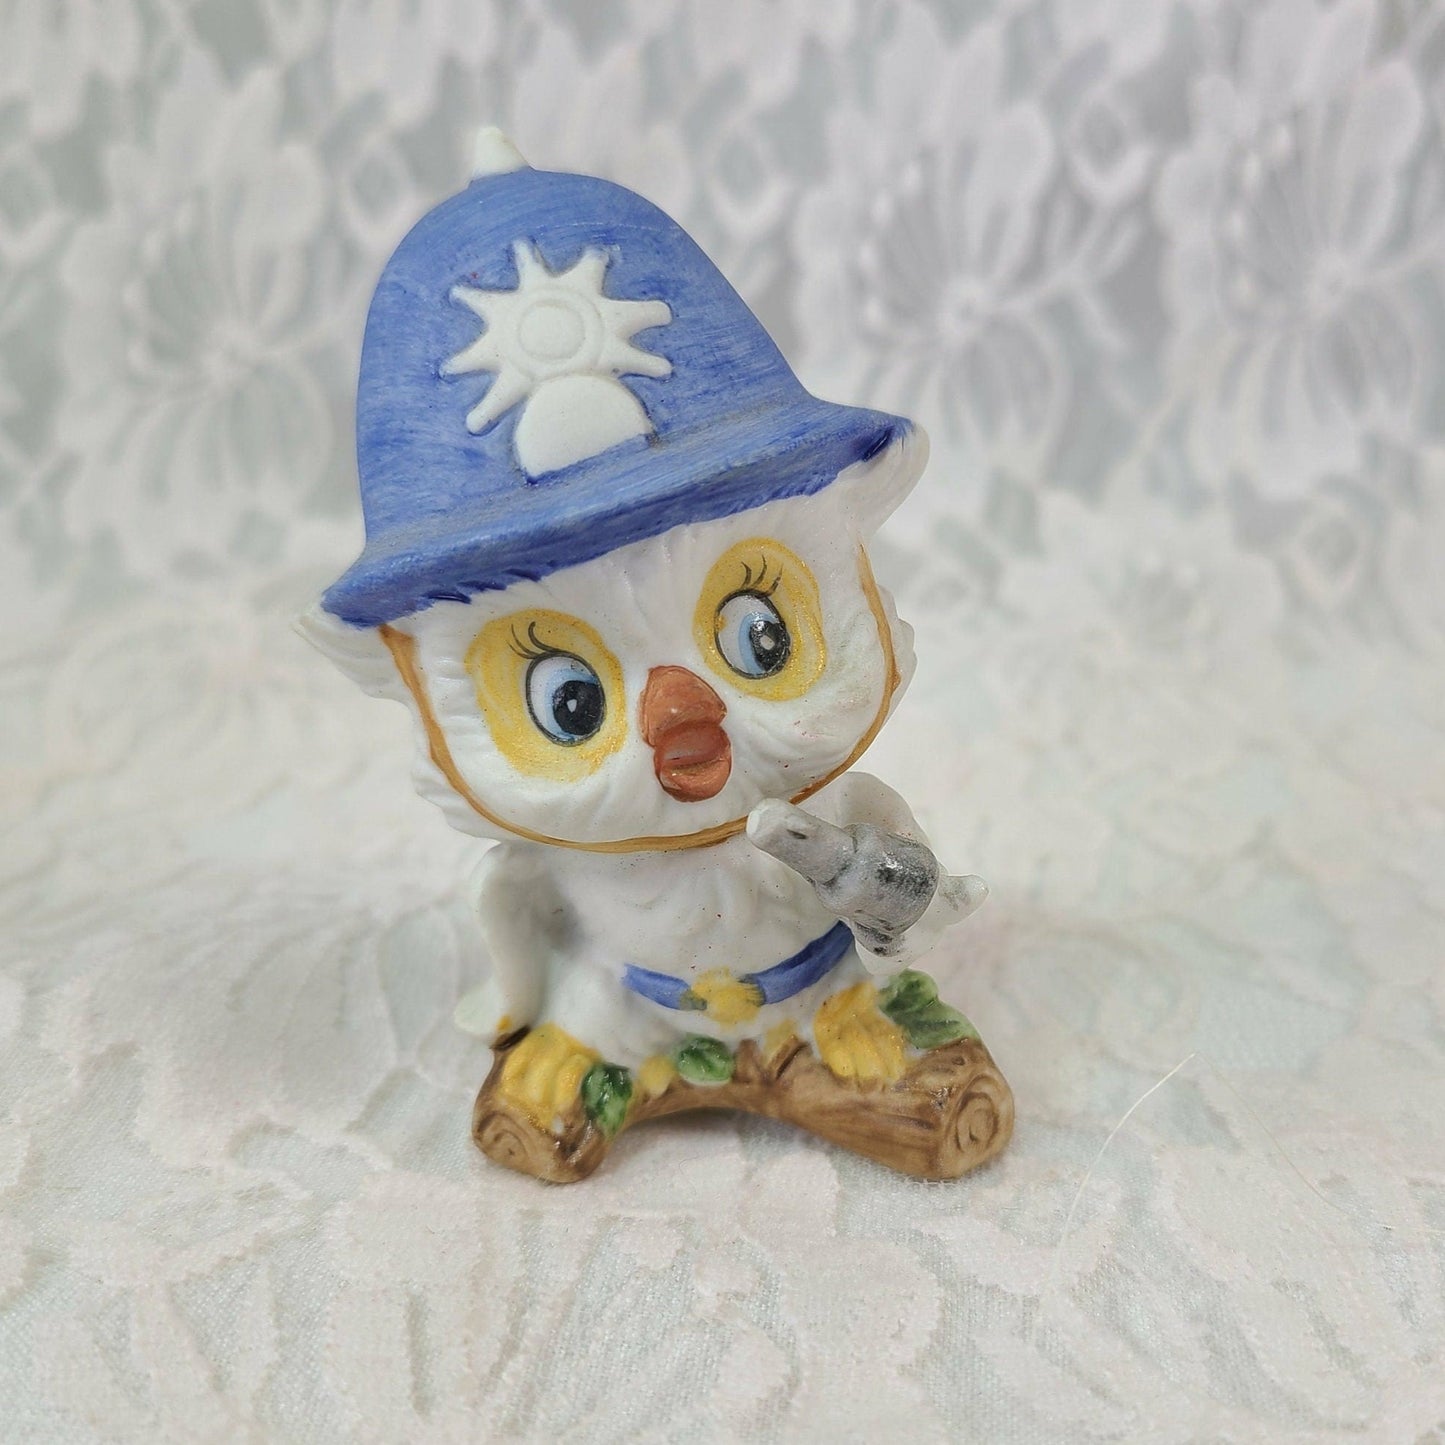 This is a wonderful little Vintage Bisque Porcelain Owl Figurine dressed as a London Bobby Beat Cop ~ Keystone Cop Owl with Pistol and Tall Bobby Cop Cap